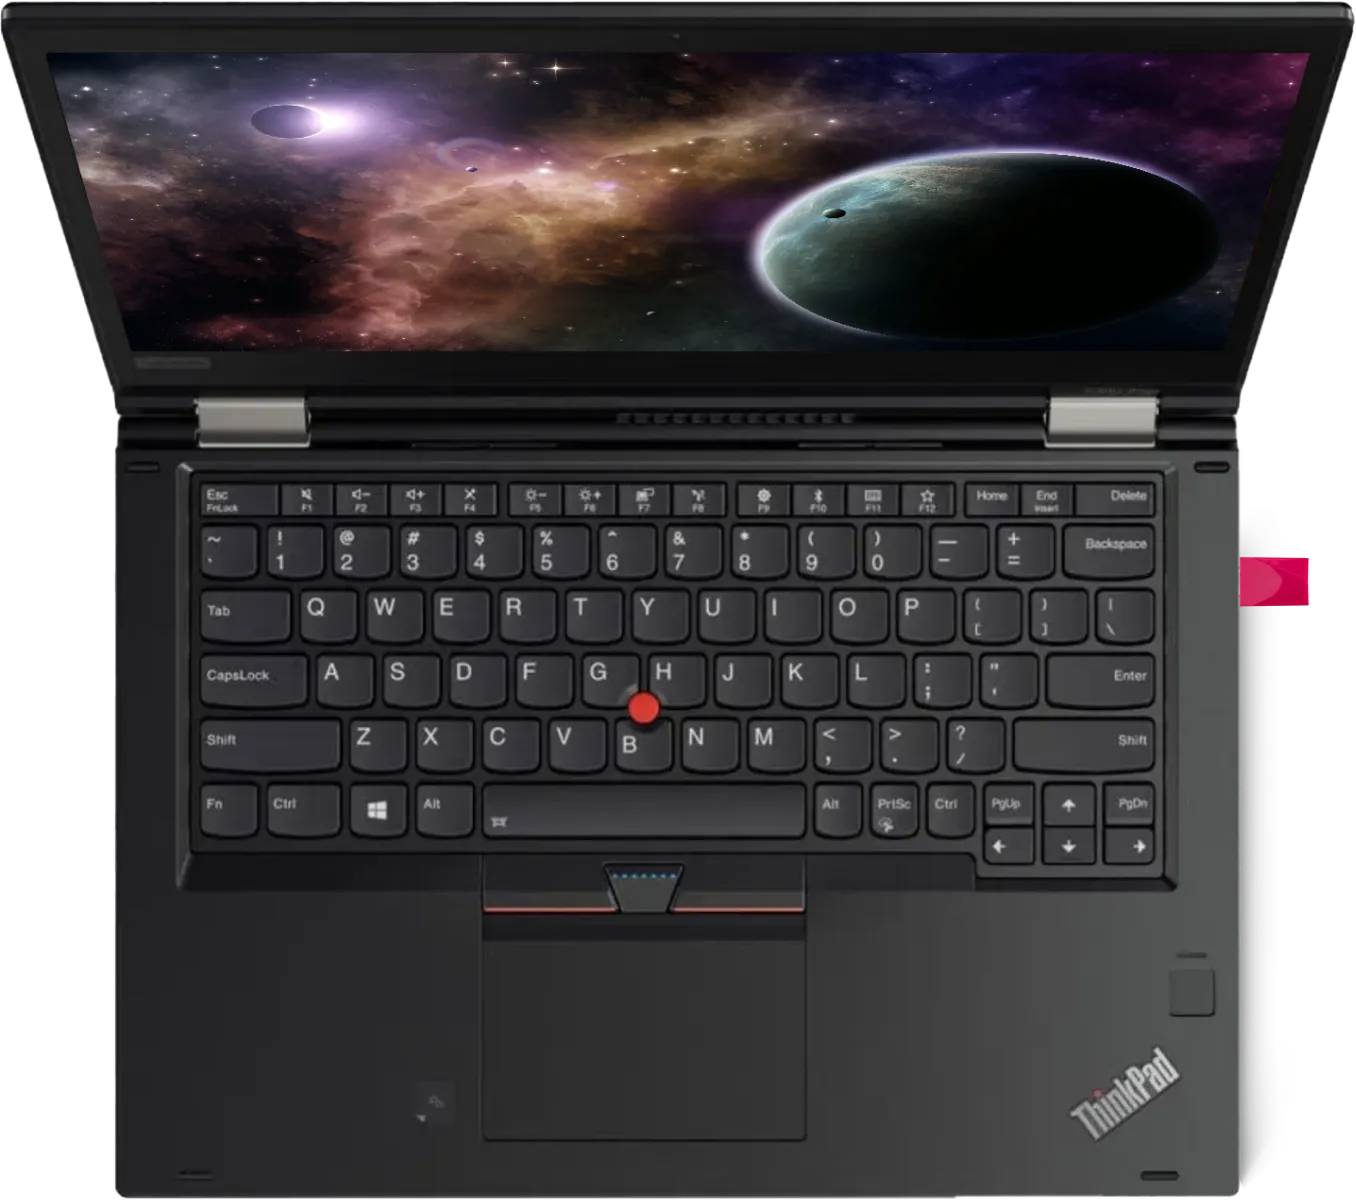 A Lenovo PC shows an image of space with the red Luna hardware plugged in